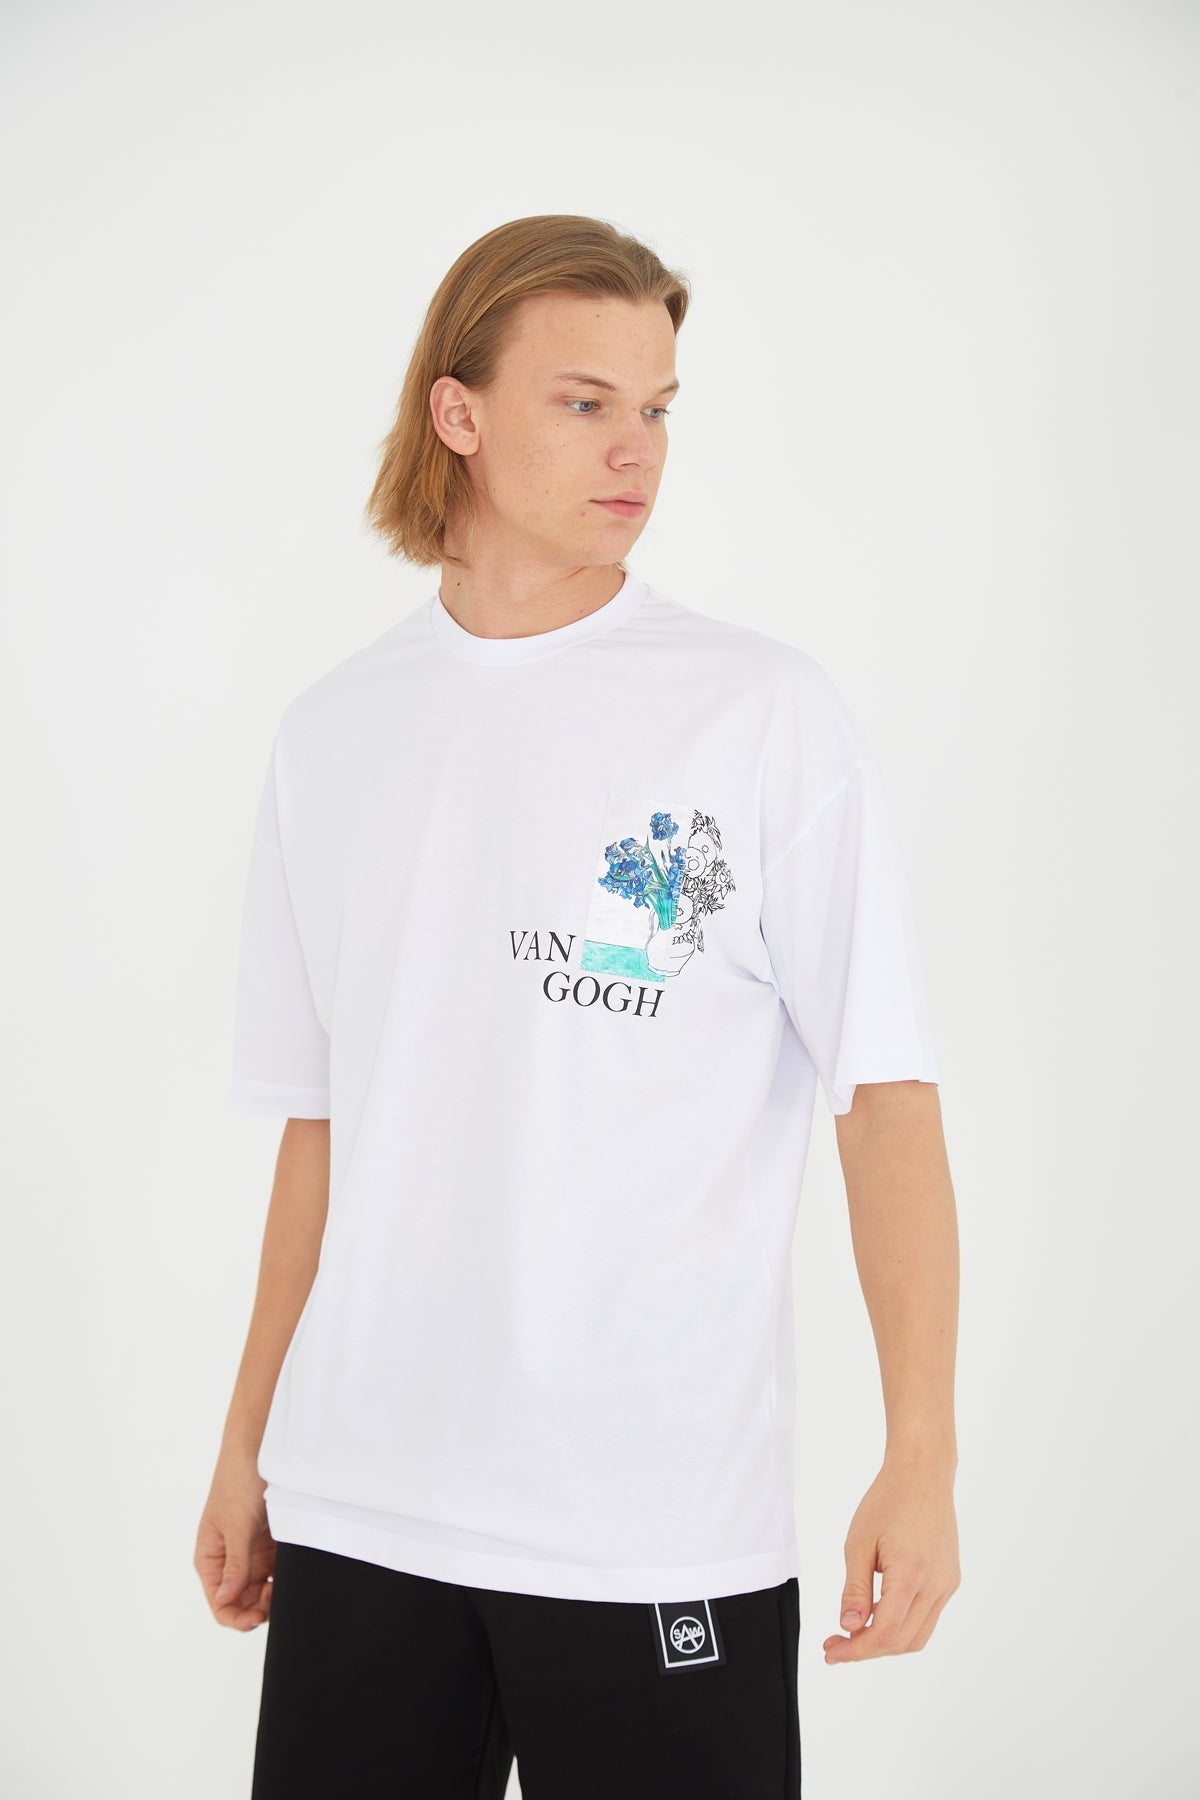 T-SHIRT - THE BLUE FLOWERS - WHITE - DYS-Amsterdam